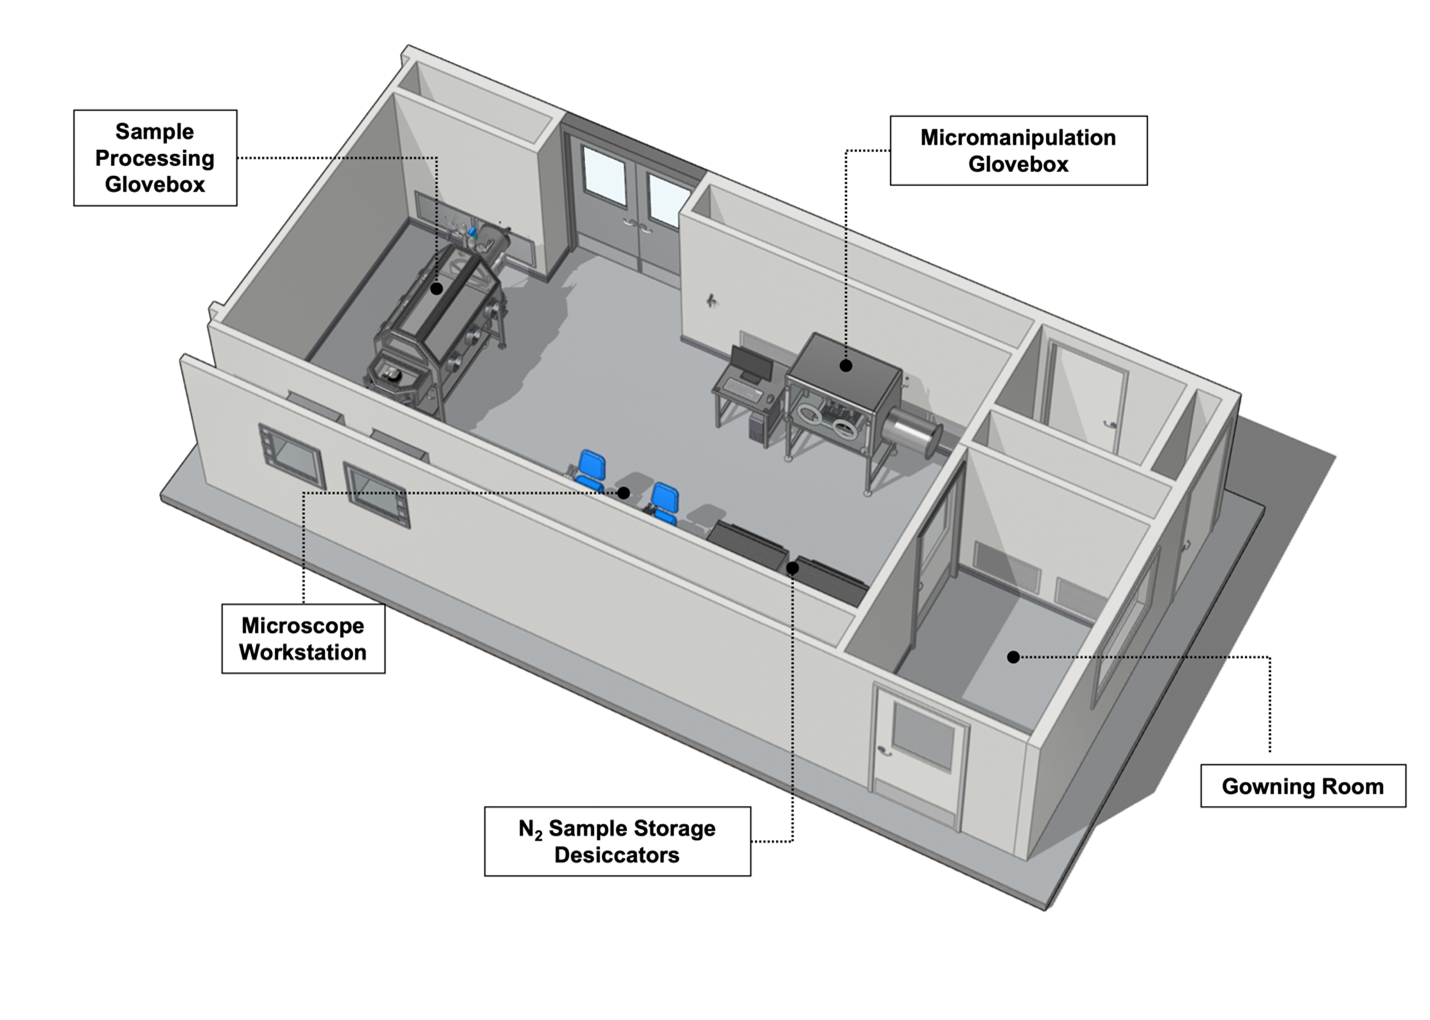  Model for the layout of the processing and curation equipment within the new Hayabusa2 ISO 5 (Class 100) cleanroom facility